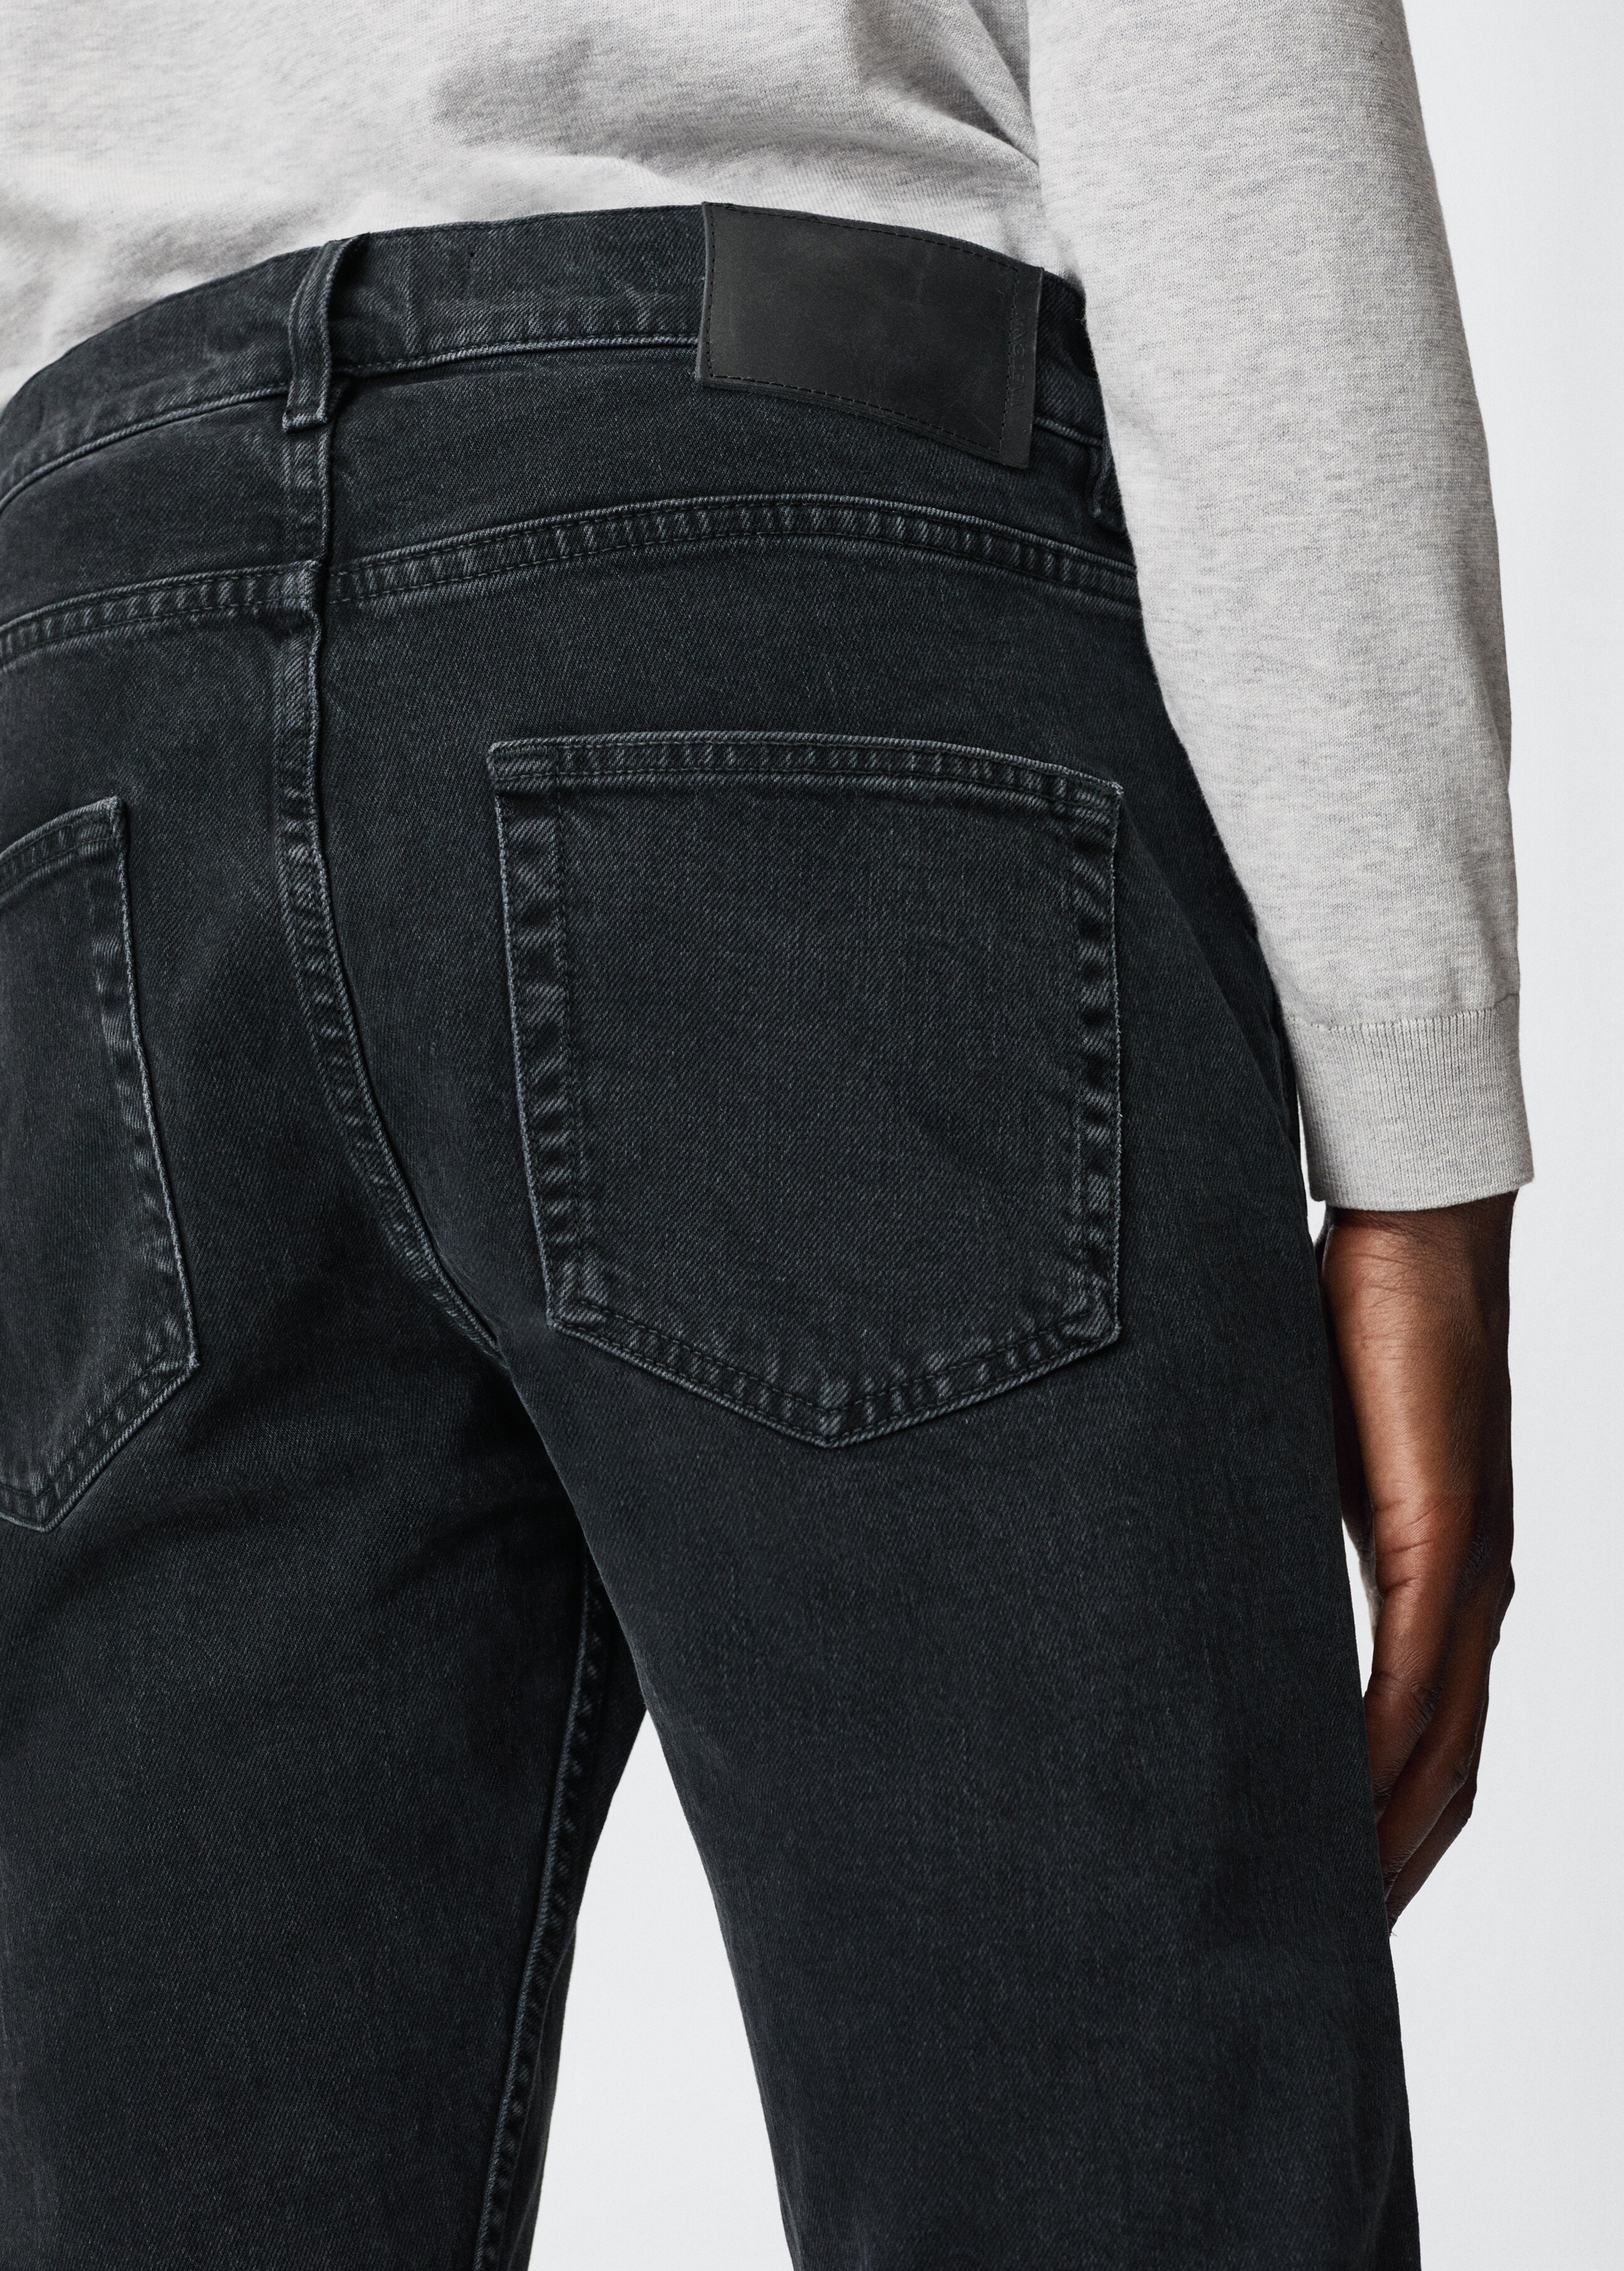 Ben tapered cropped jeans - Details of the article 3